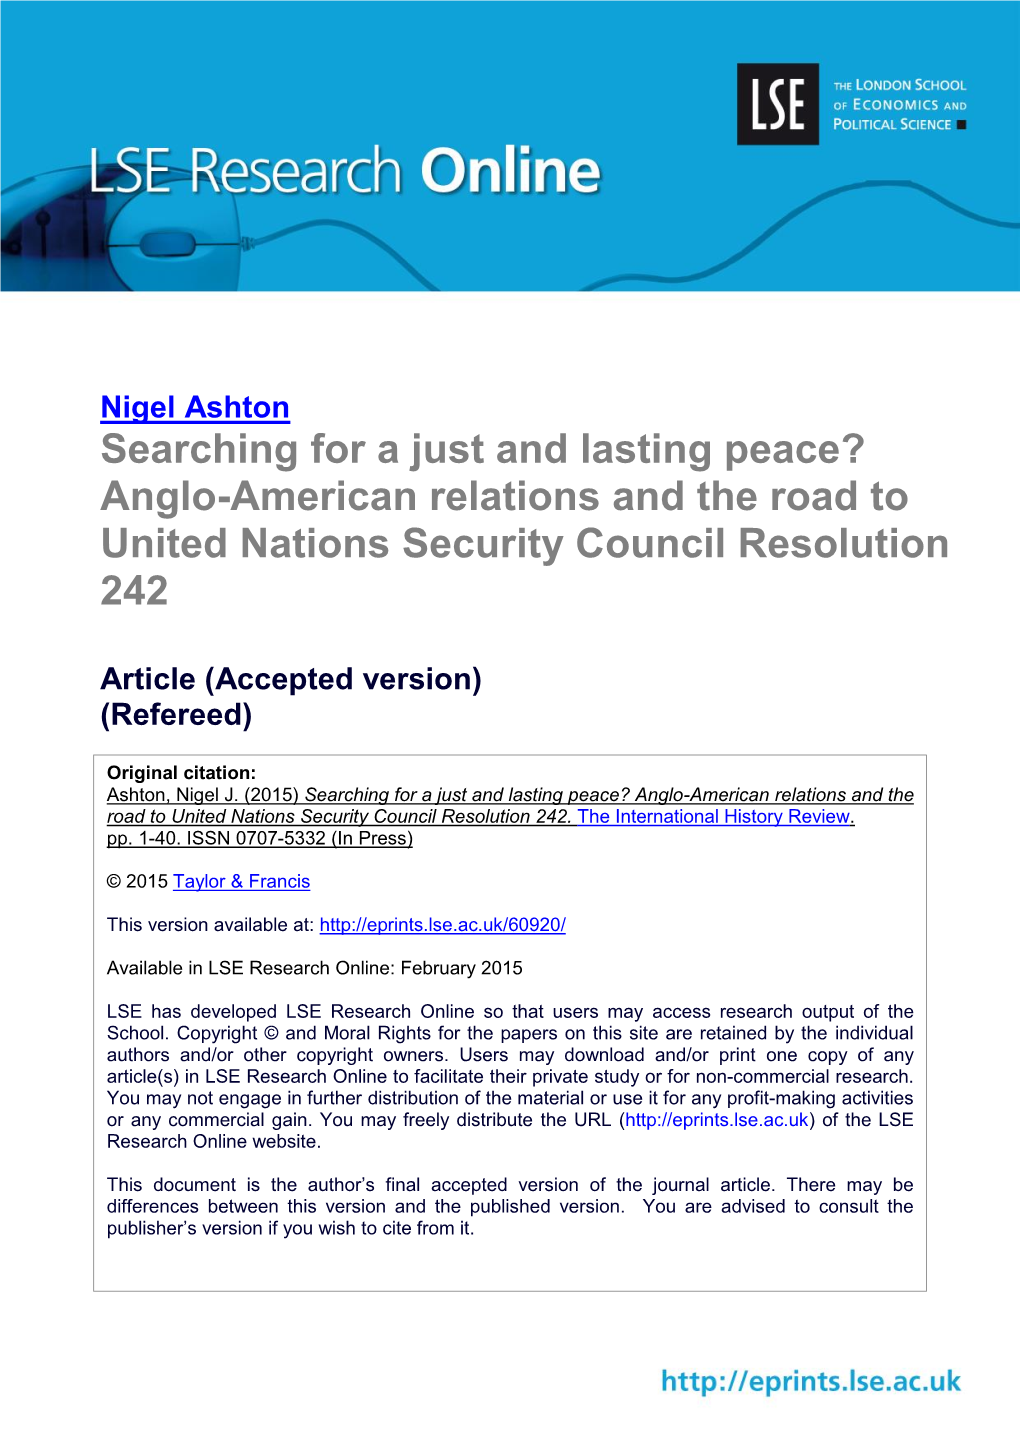 Searching for a Just and Lasting Peace? Anglo-American Relations and the Road to United Nations Security Council Resolution 242